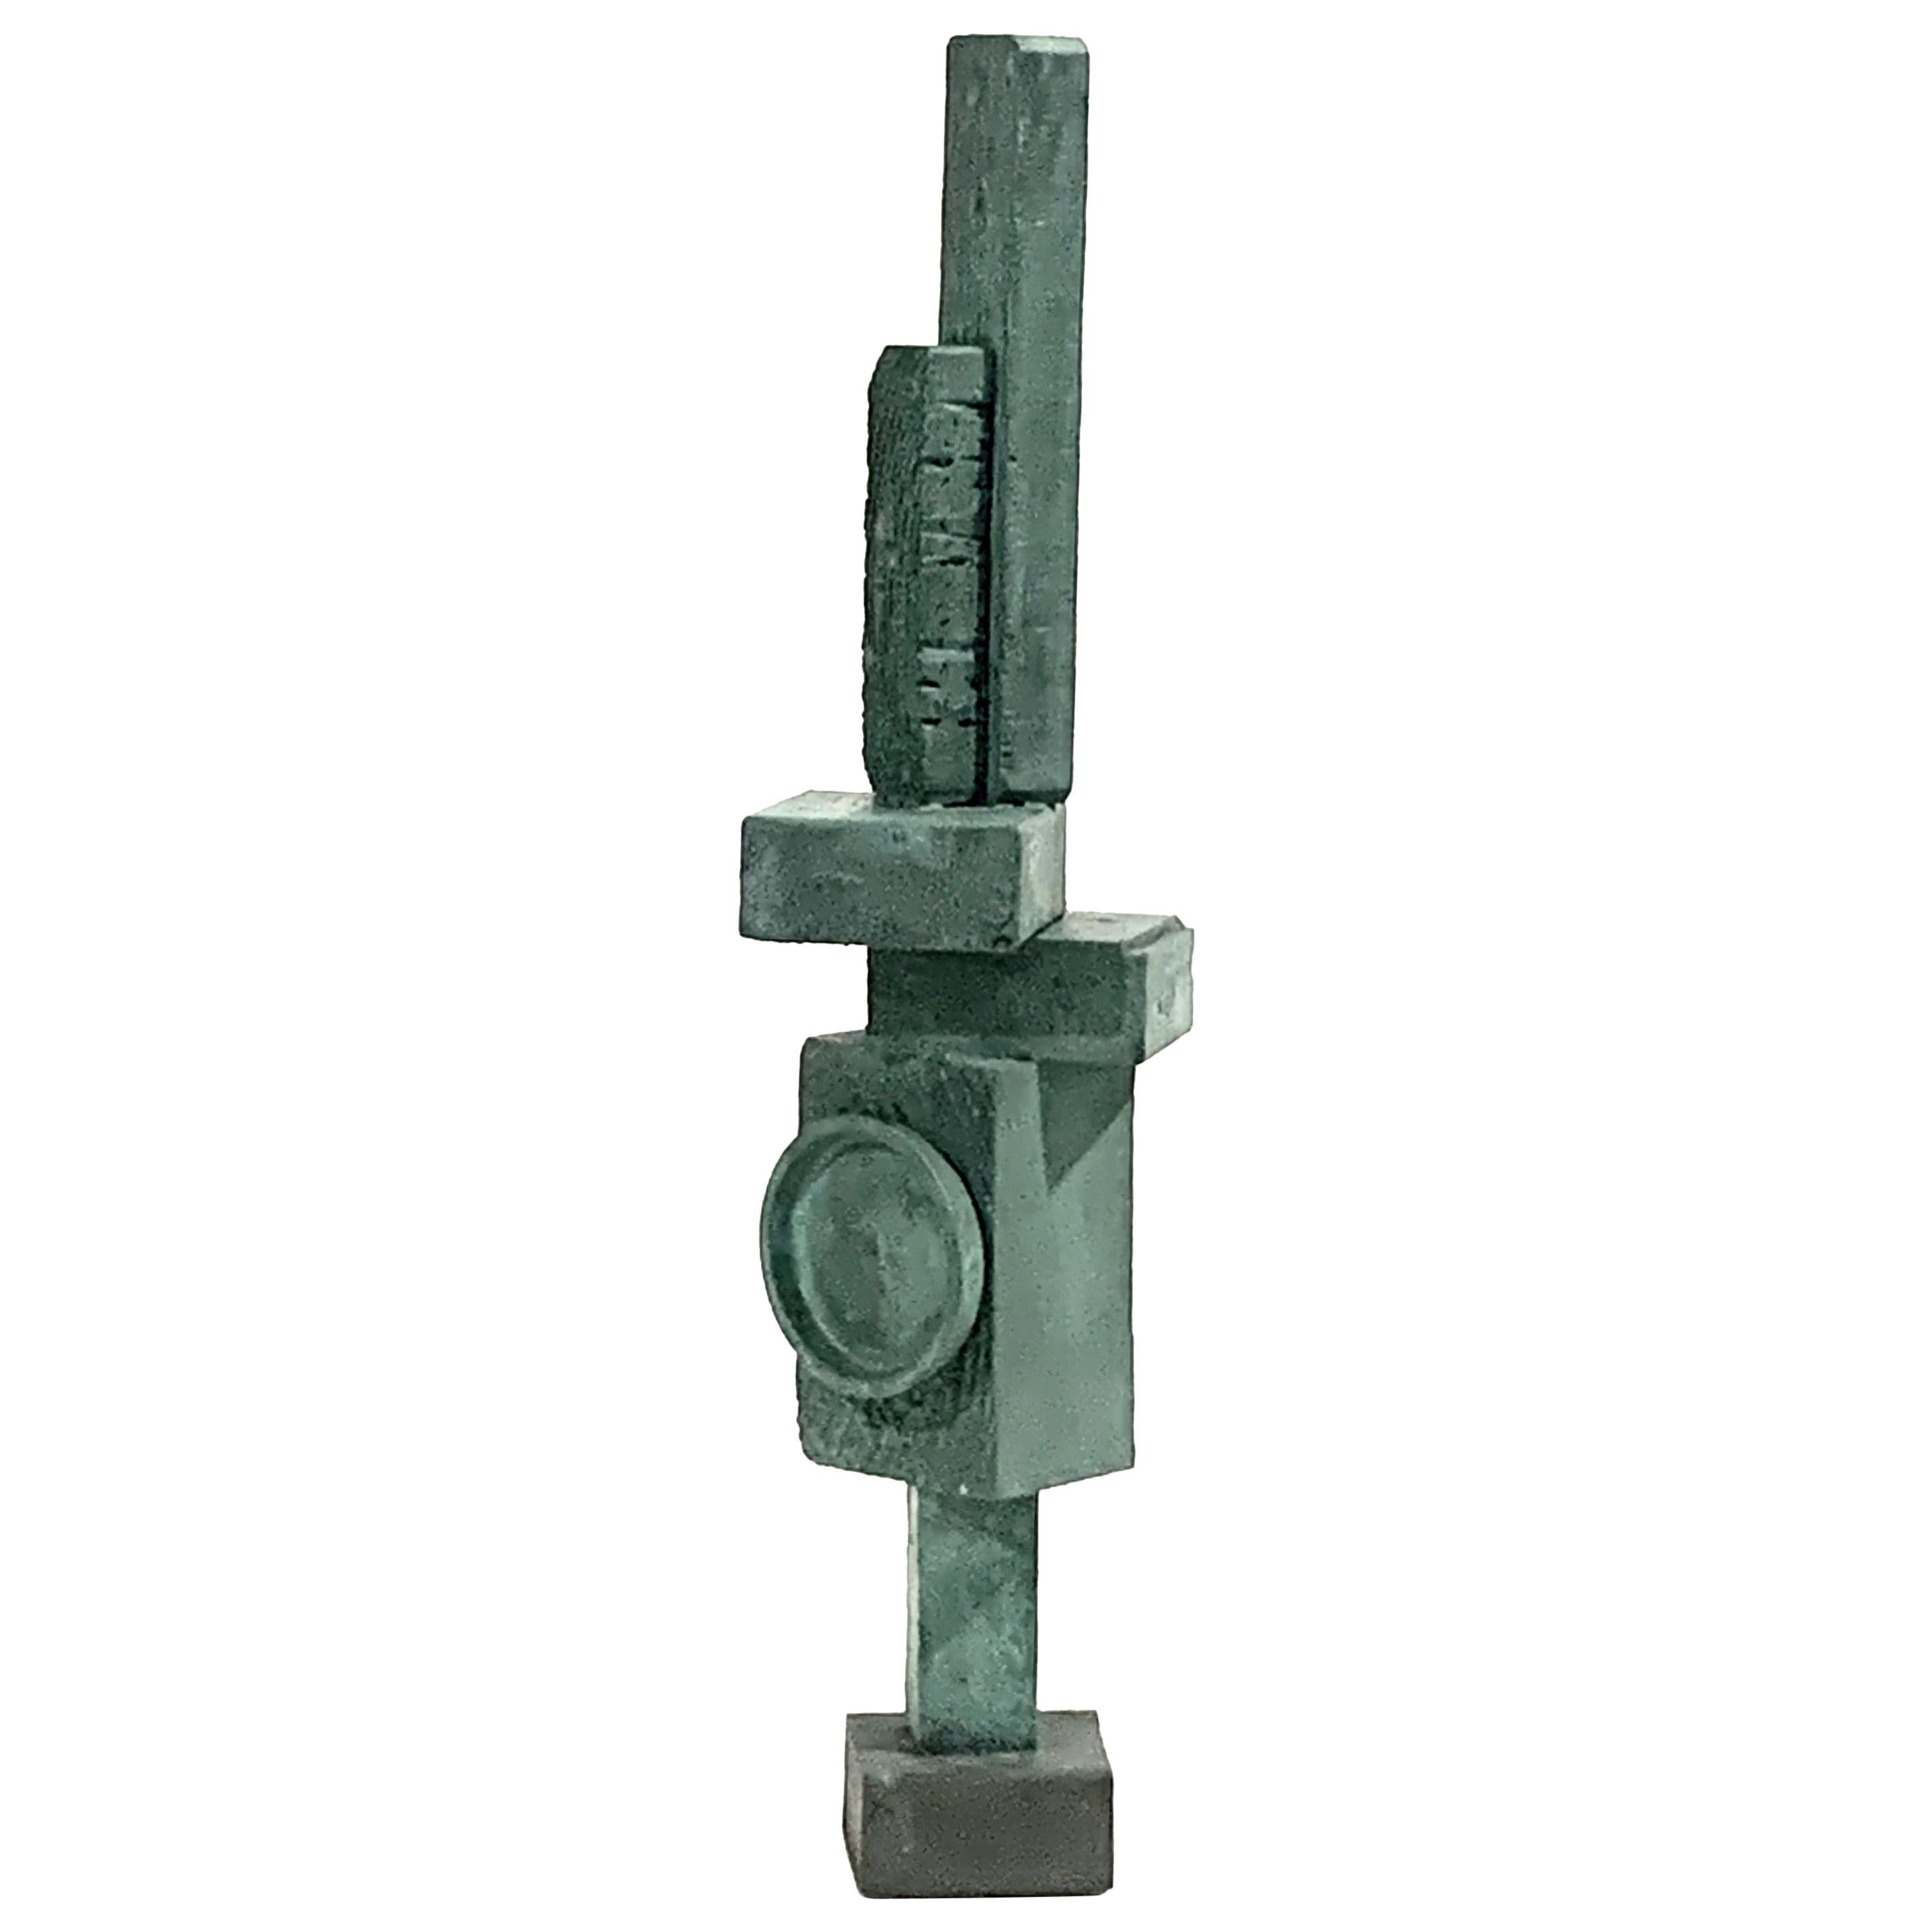 'Ignacio' Tall TOTEM Sculpture with Weathered Bronze Finish by Judy Engel